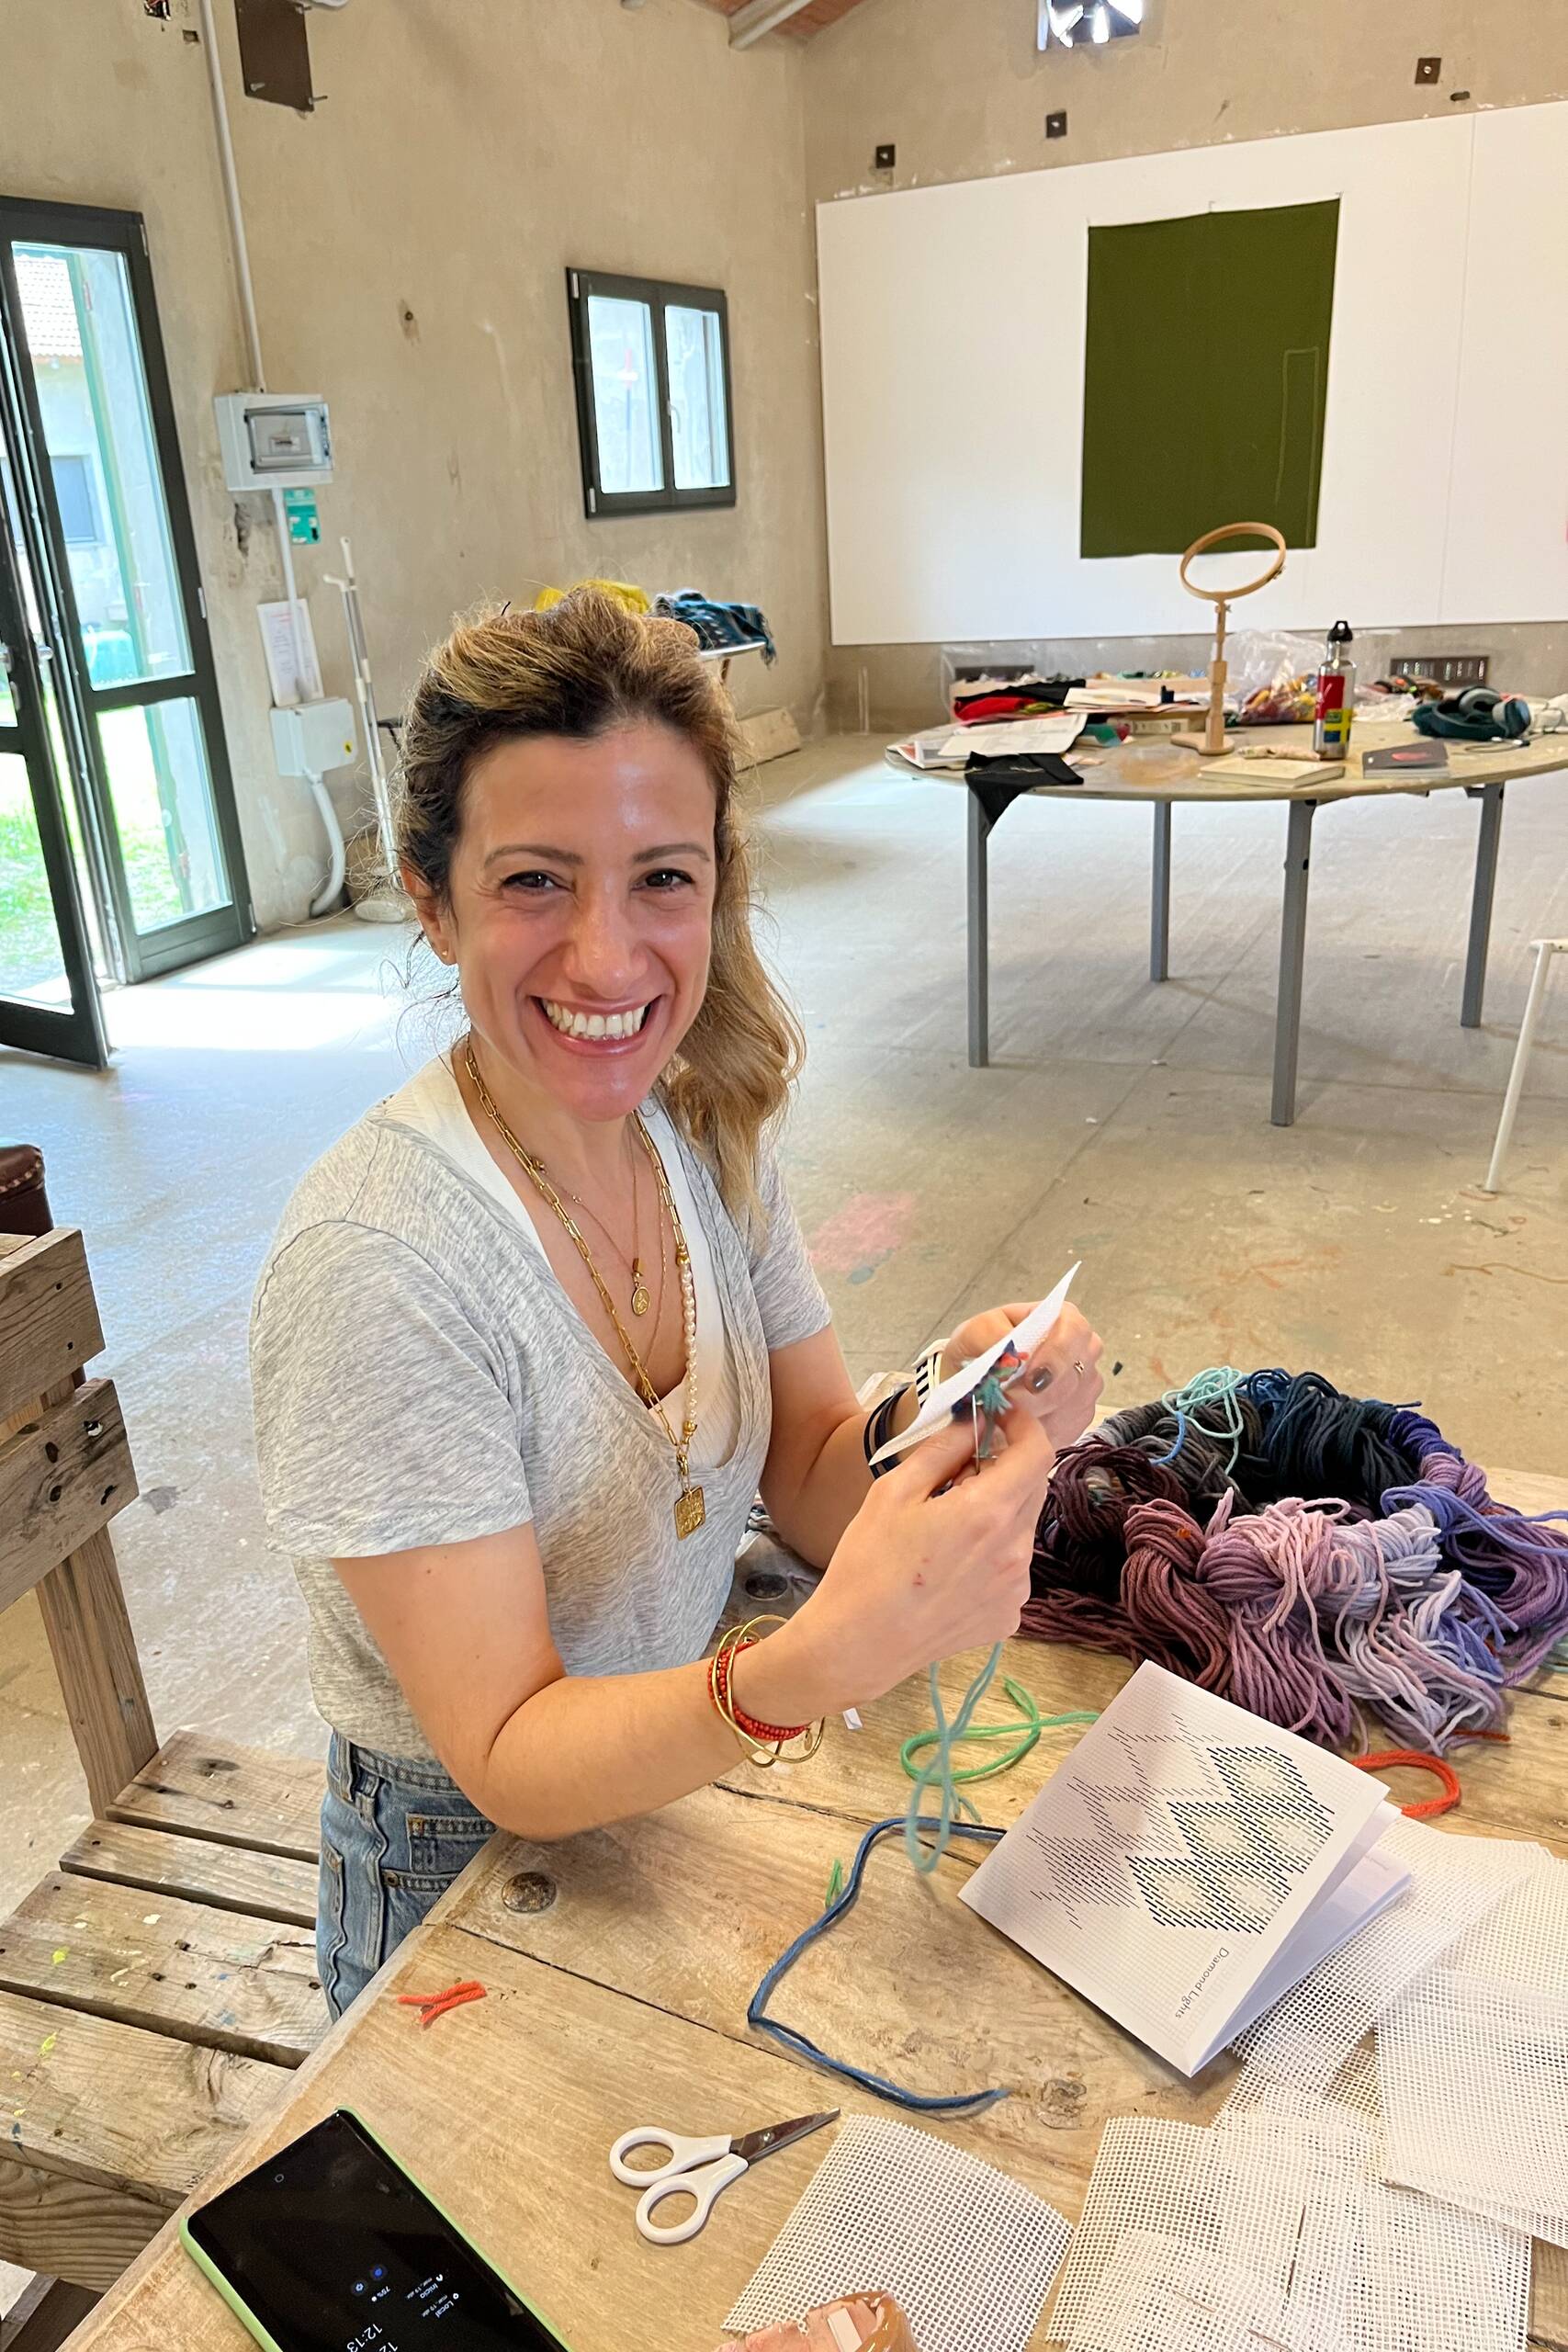 Villa Lena workshops, Series of 12 embroidery workshops held at Villa Lena as part of the Villa Lena Artist Residency, Tuscany Italy, 2022